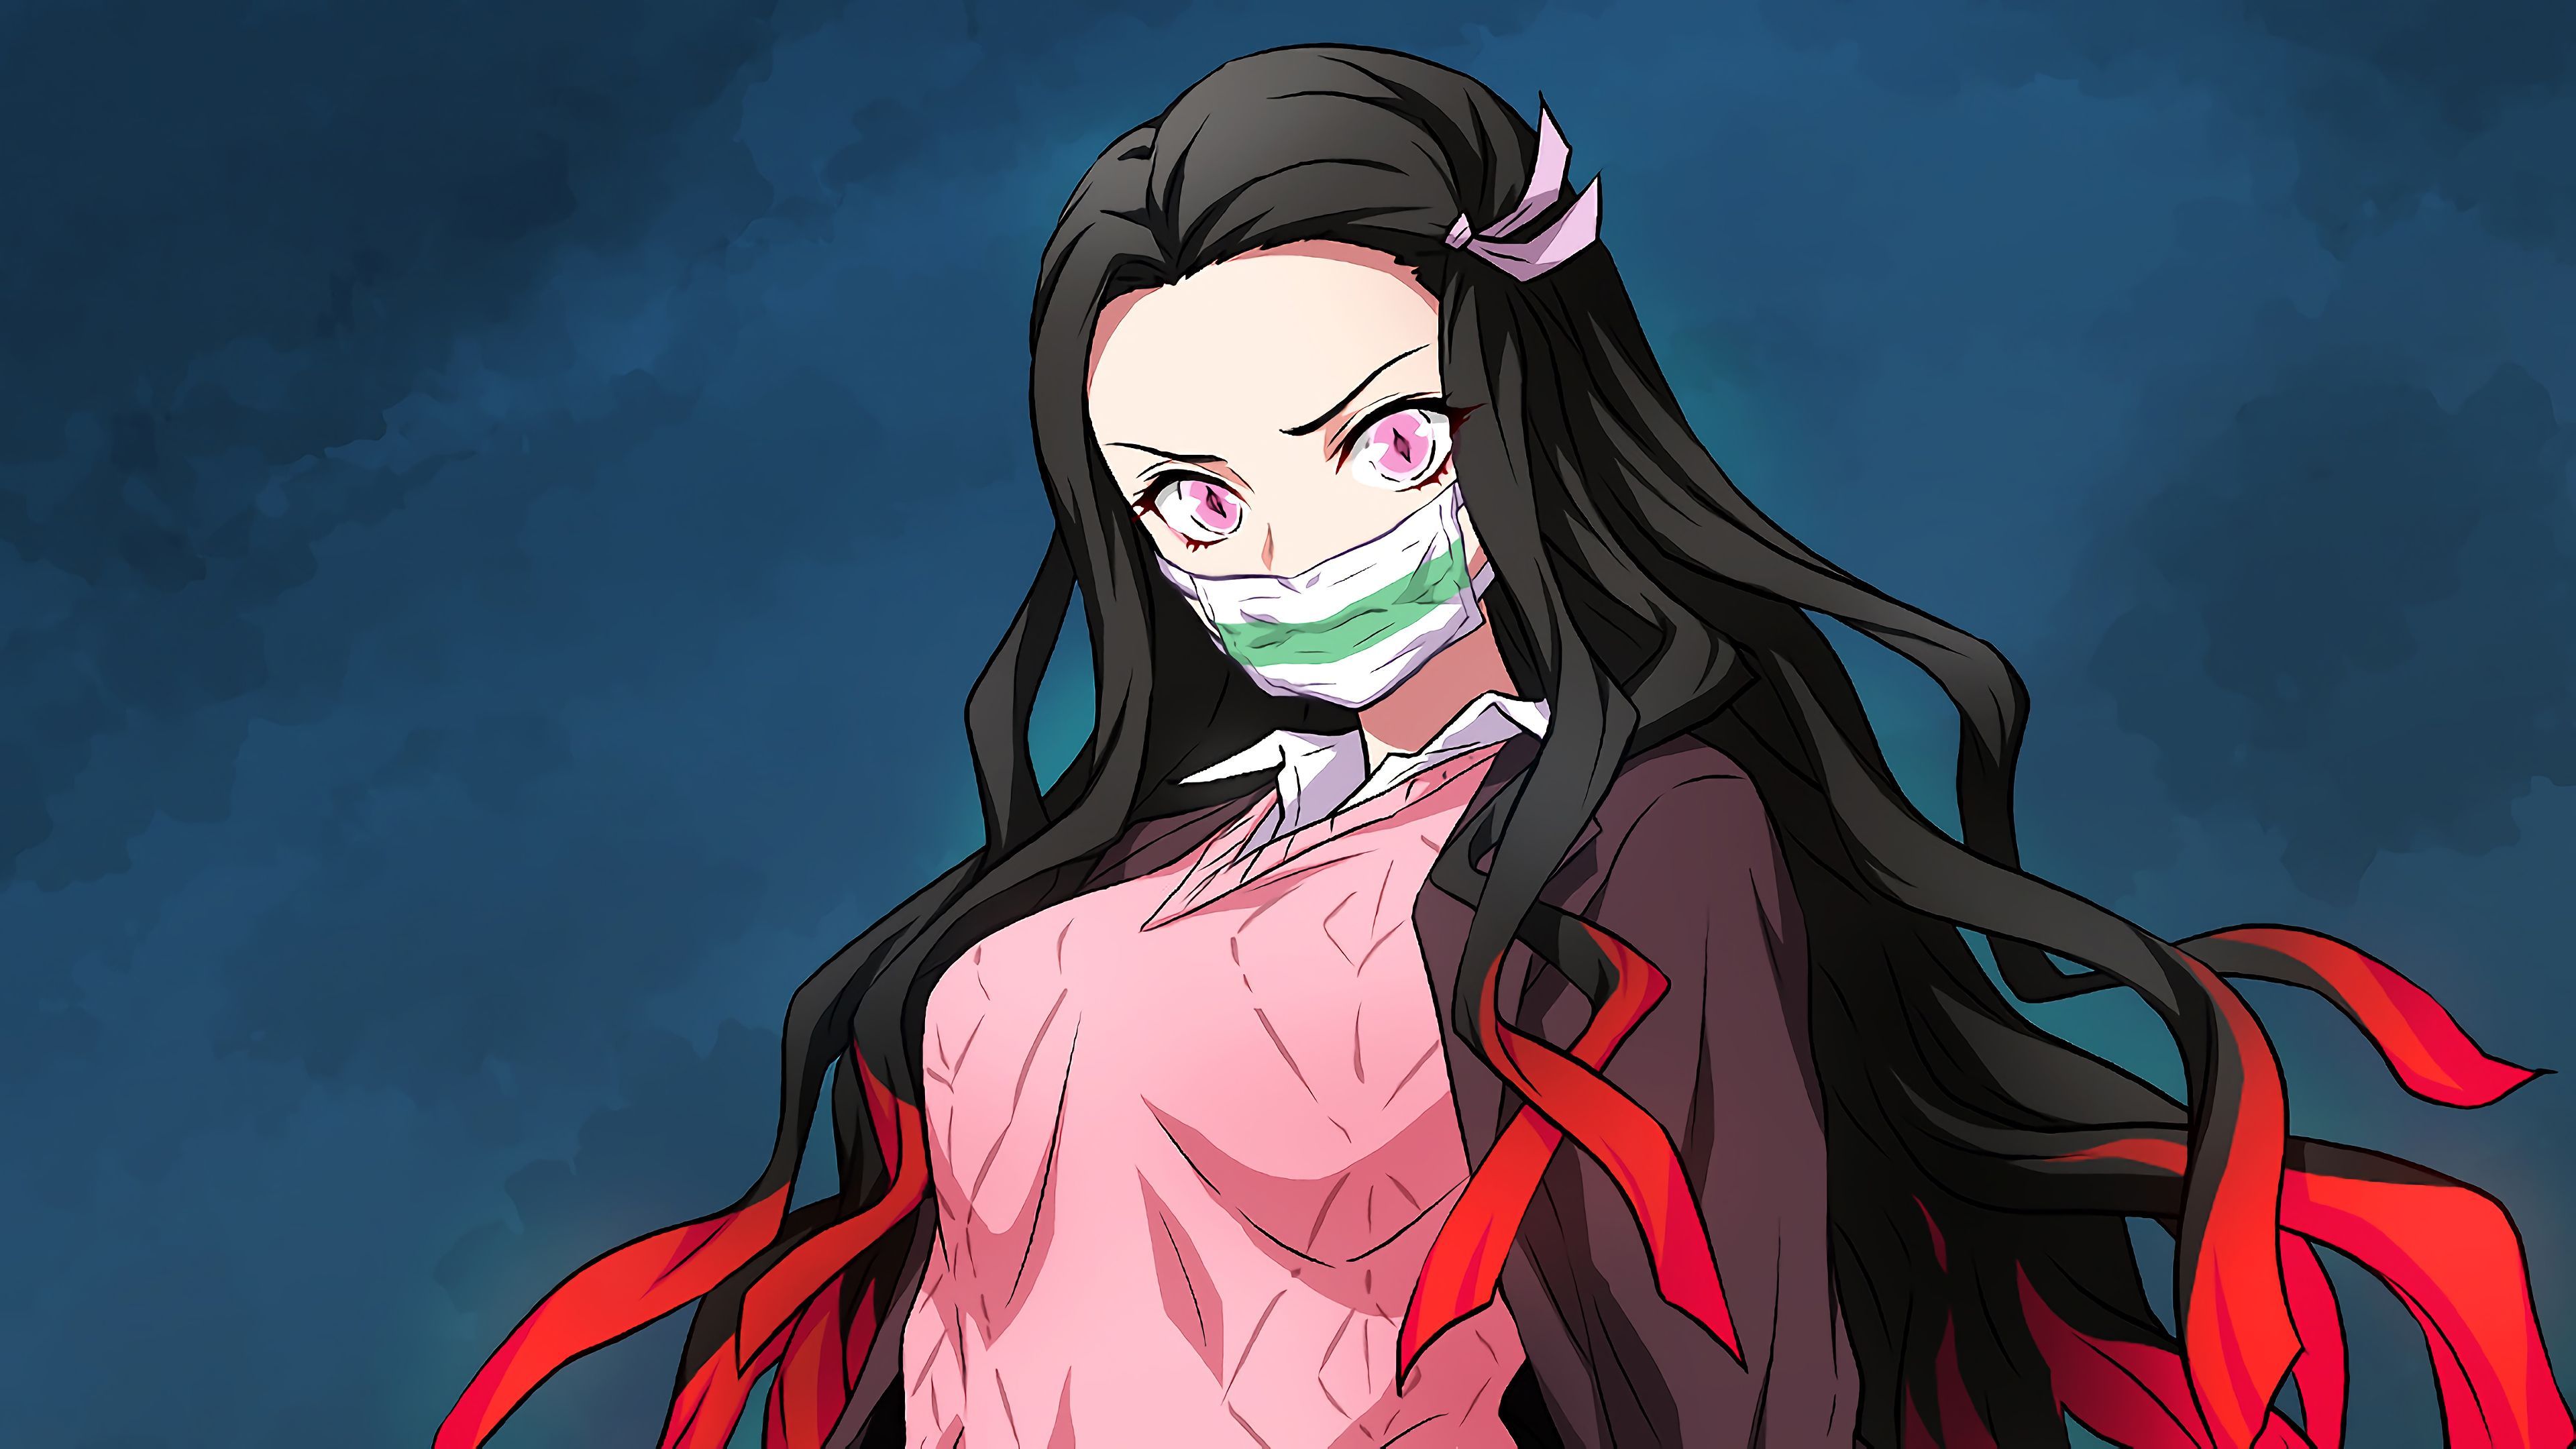 Demon Slayer Nezuko Wallpapers posted by Samantha Simpson